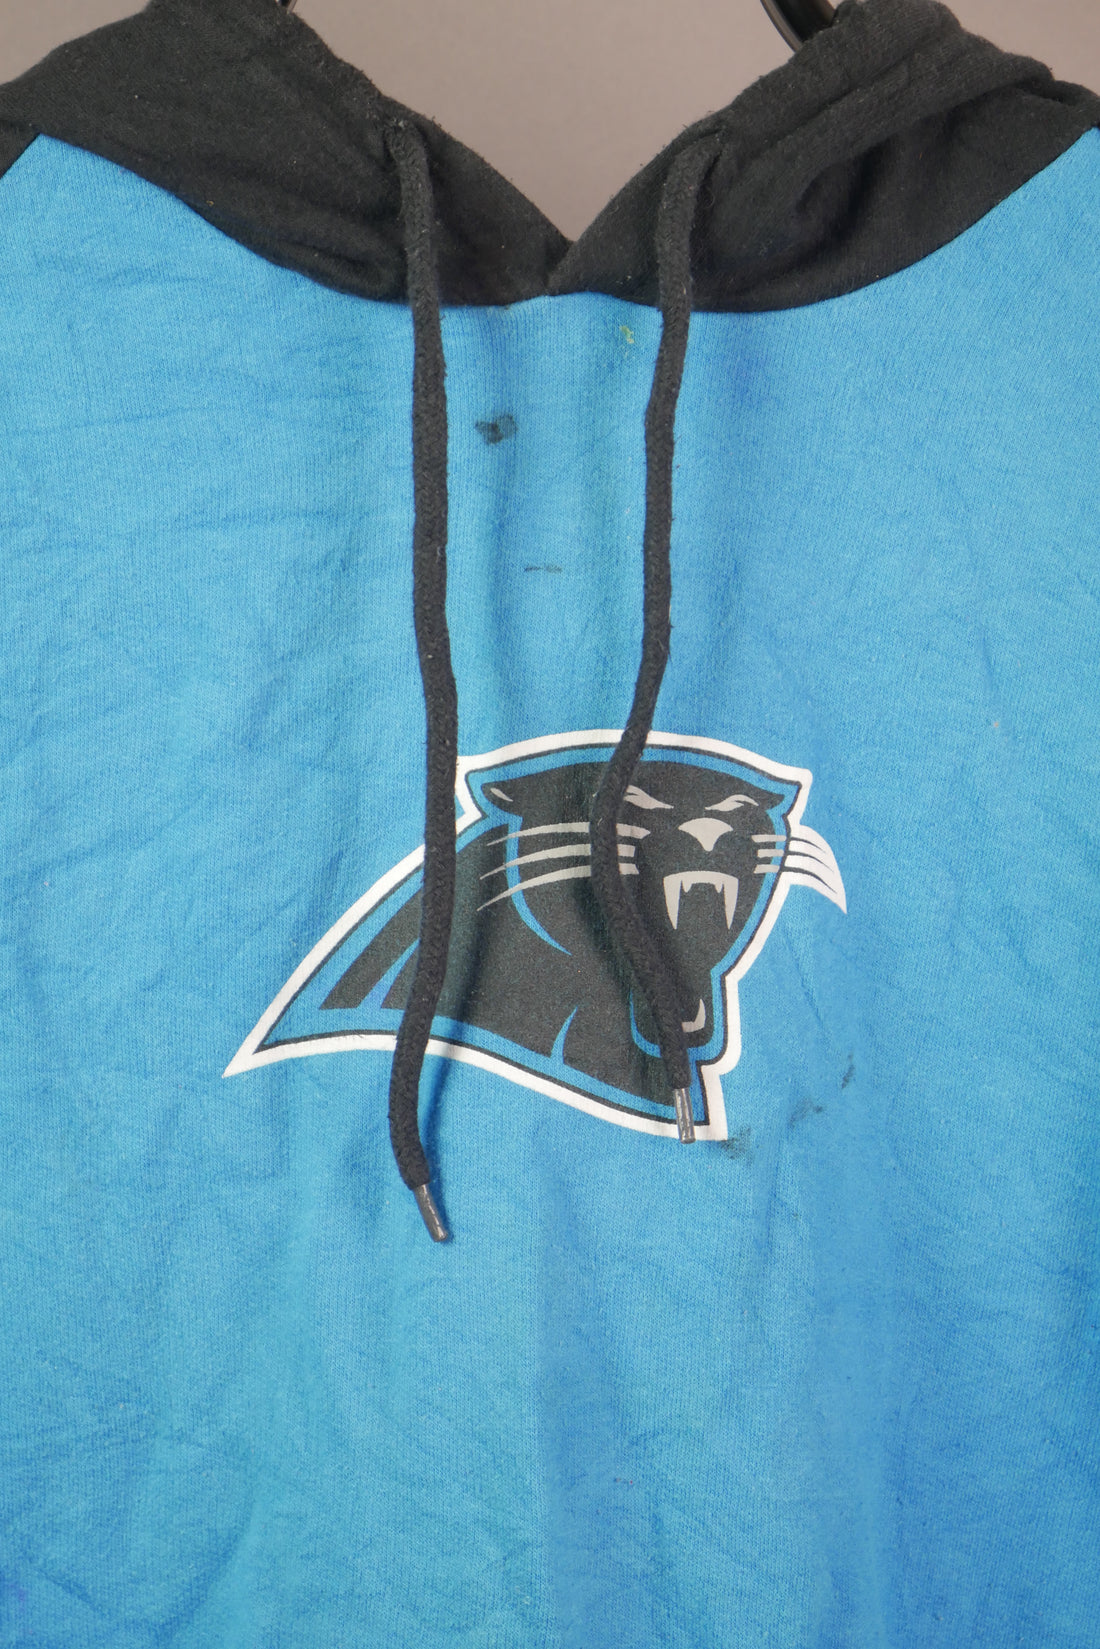 The NFL Graphic Hoodie (L)